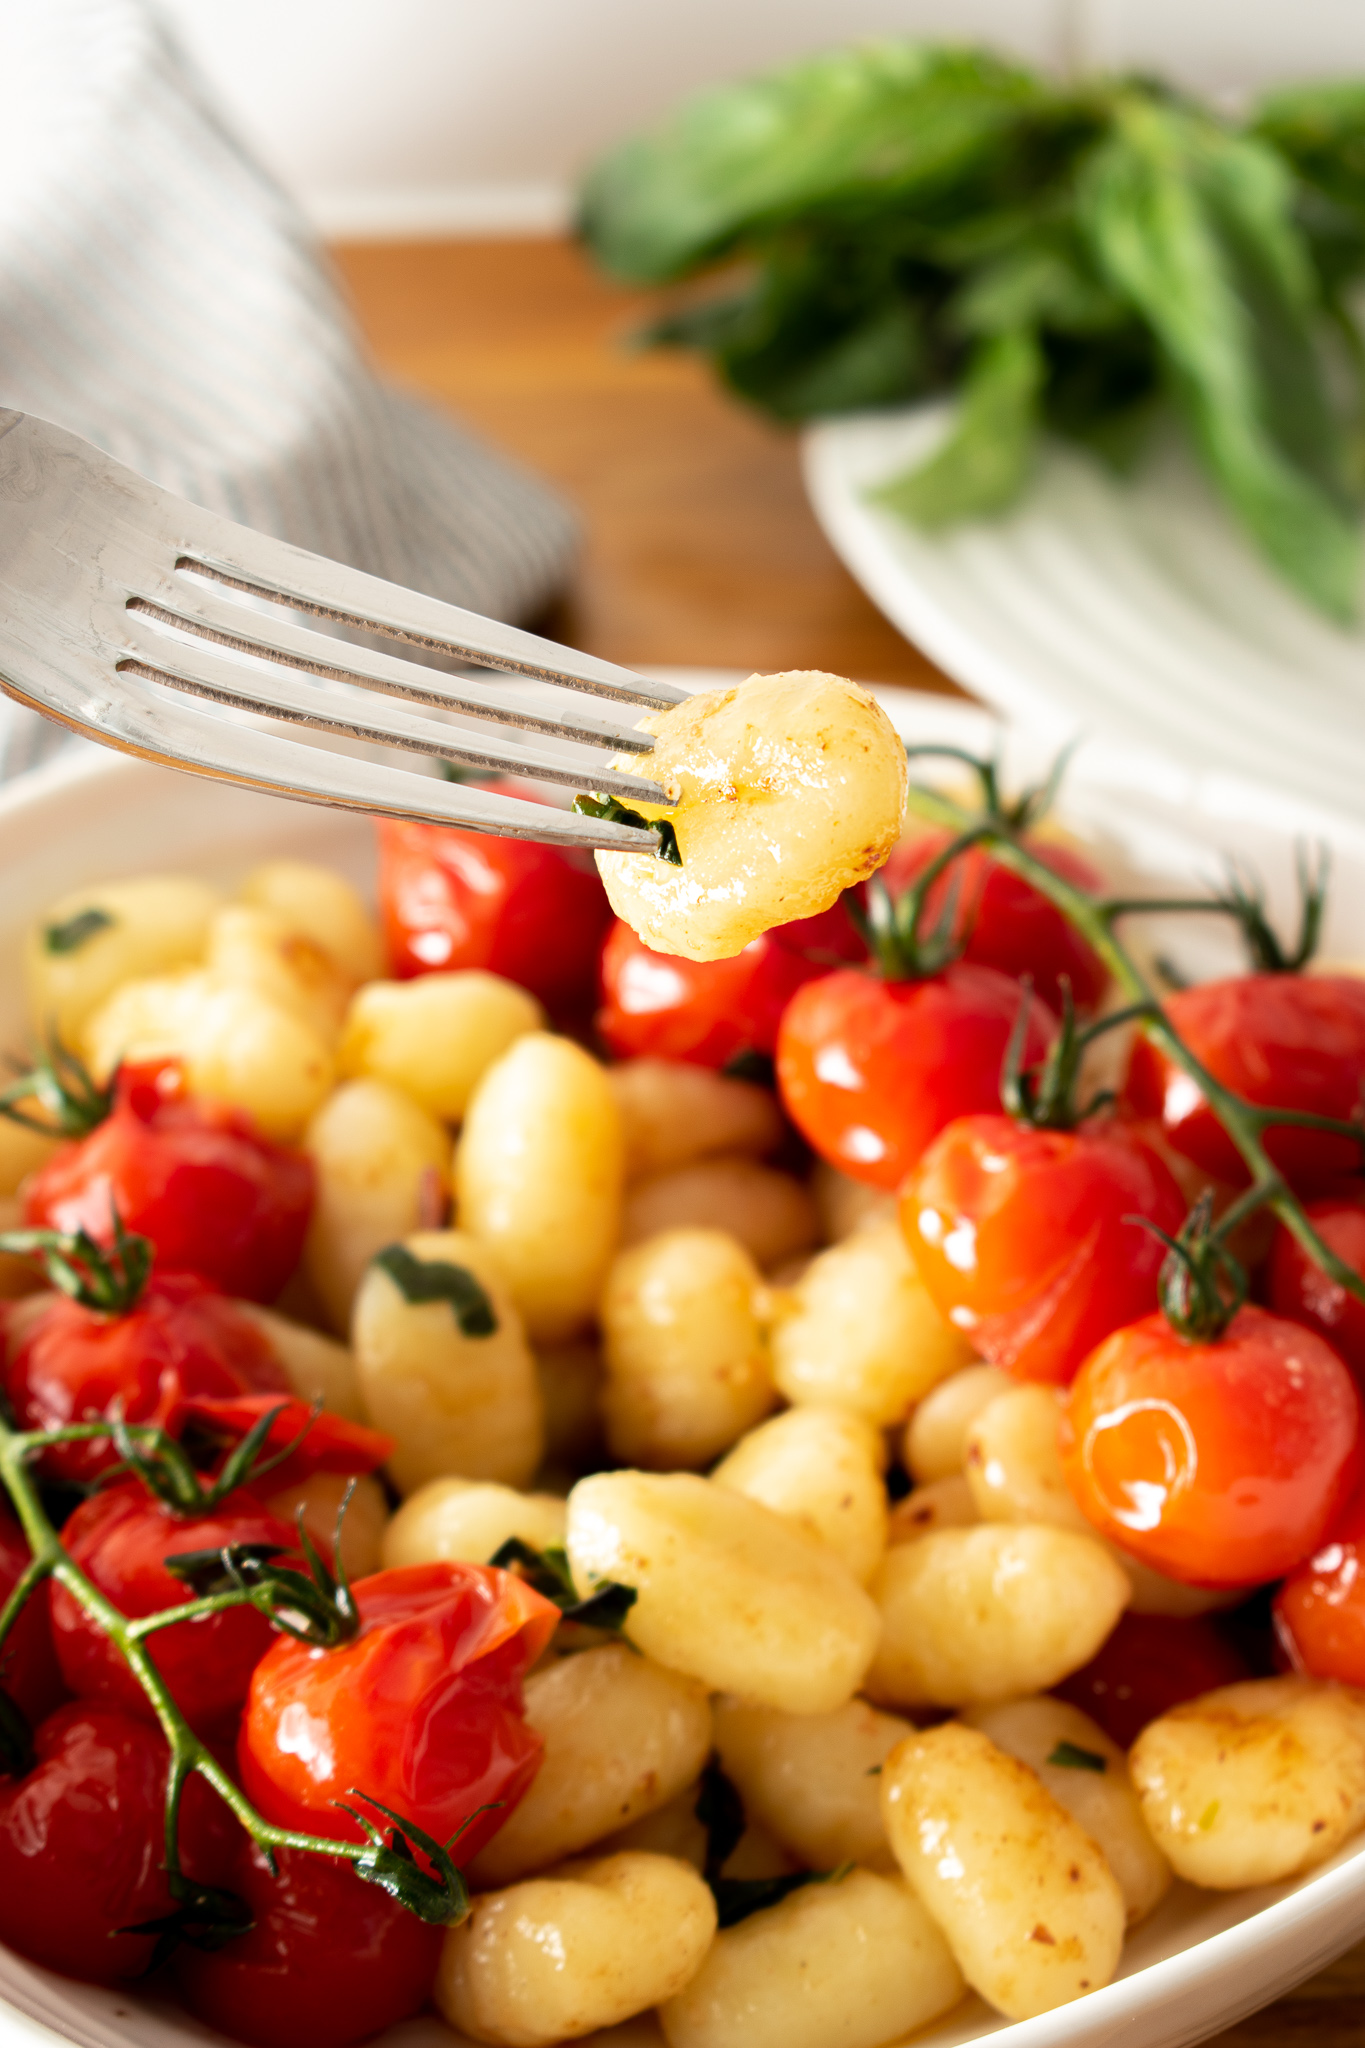 The Home Baked Vegan's Vegan Garlic Butter Gnocchi with Cherry Tomatoes and Basil 